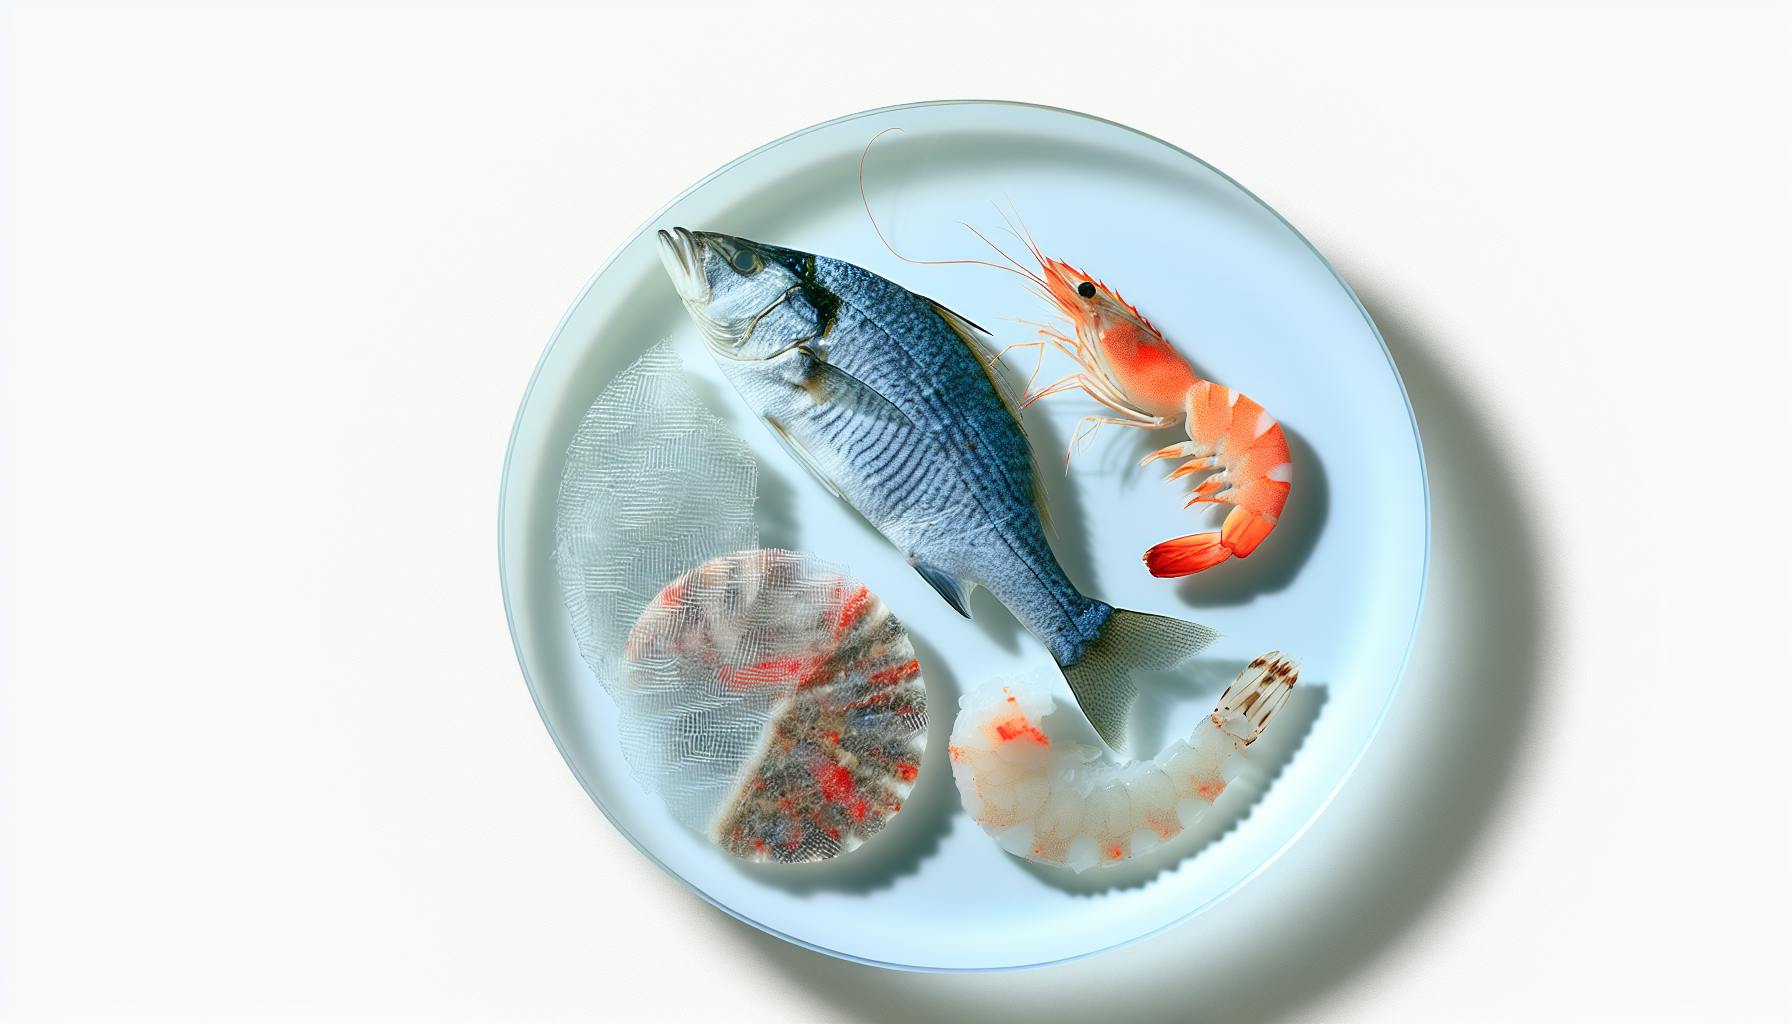 Microplastics in Seafood: Health Implications Explored